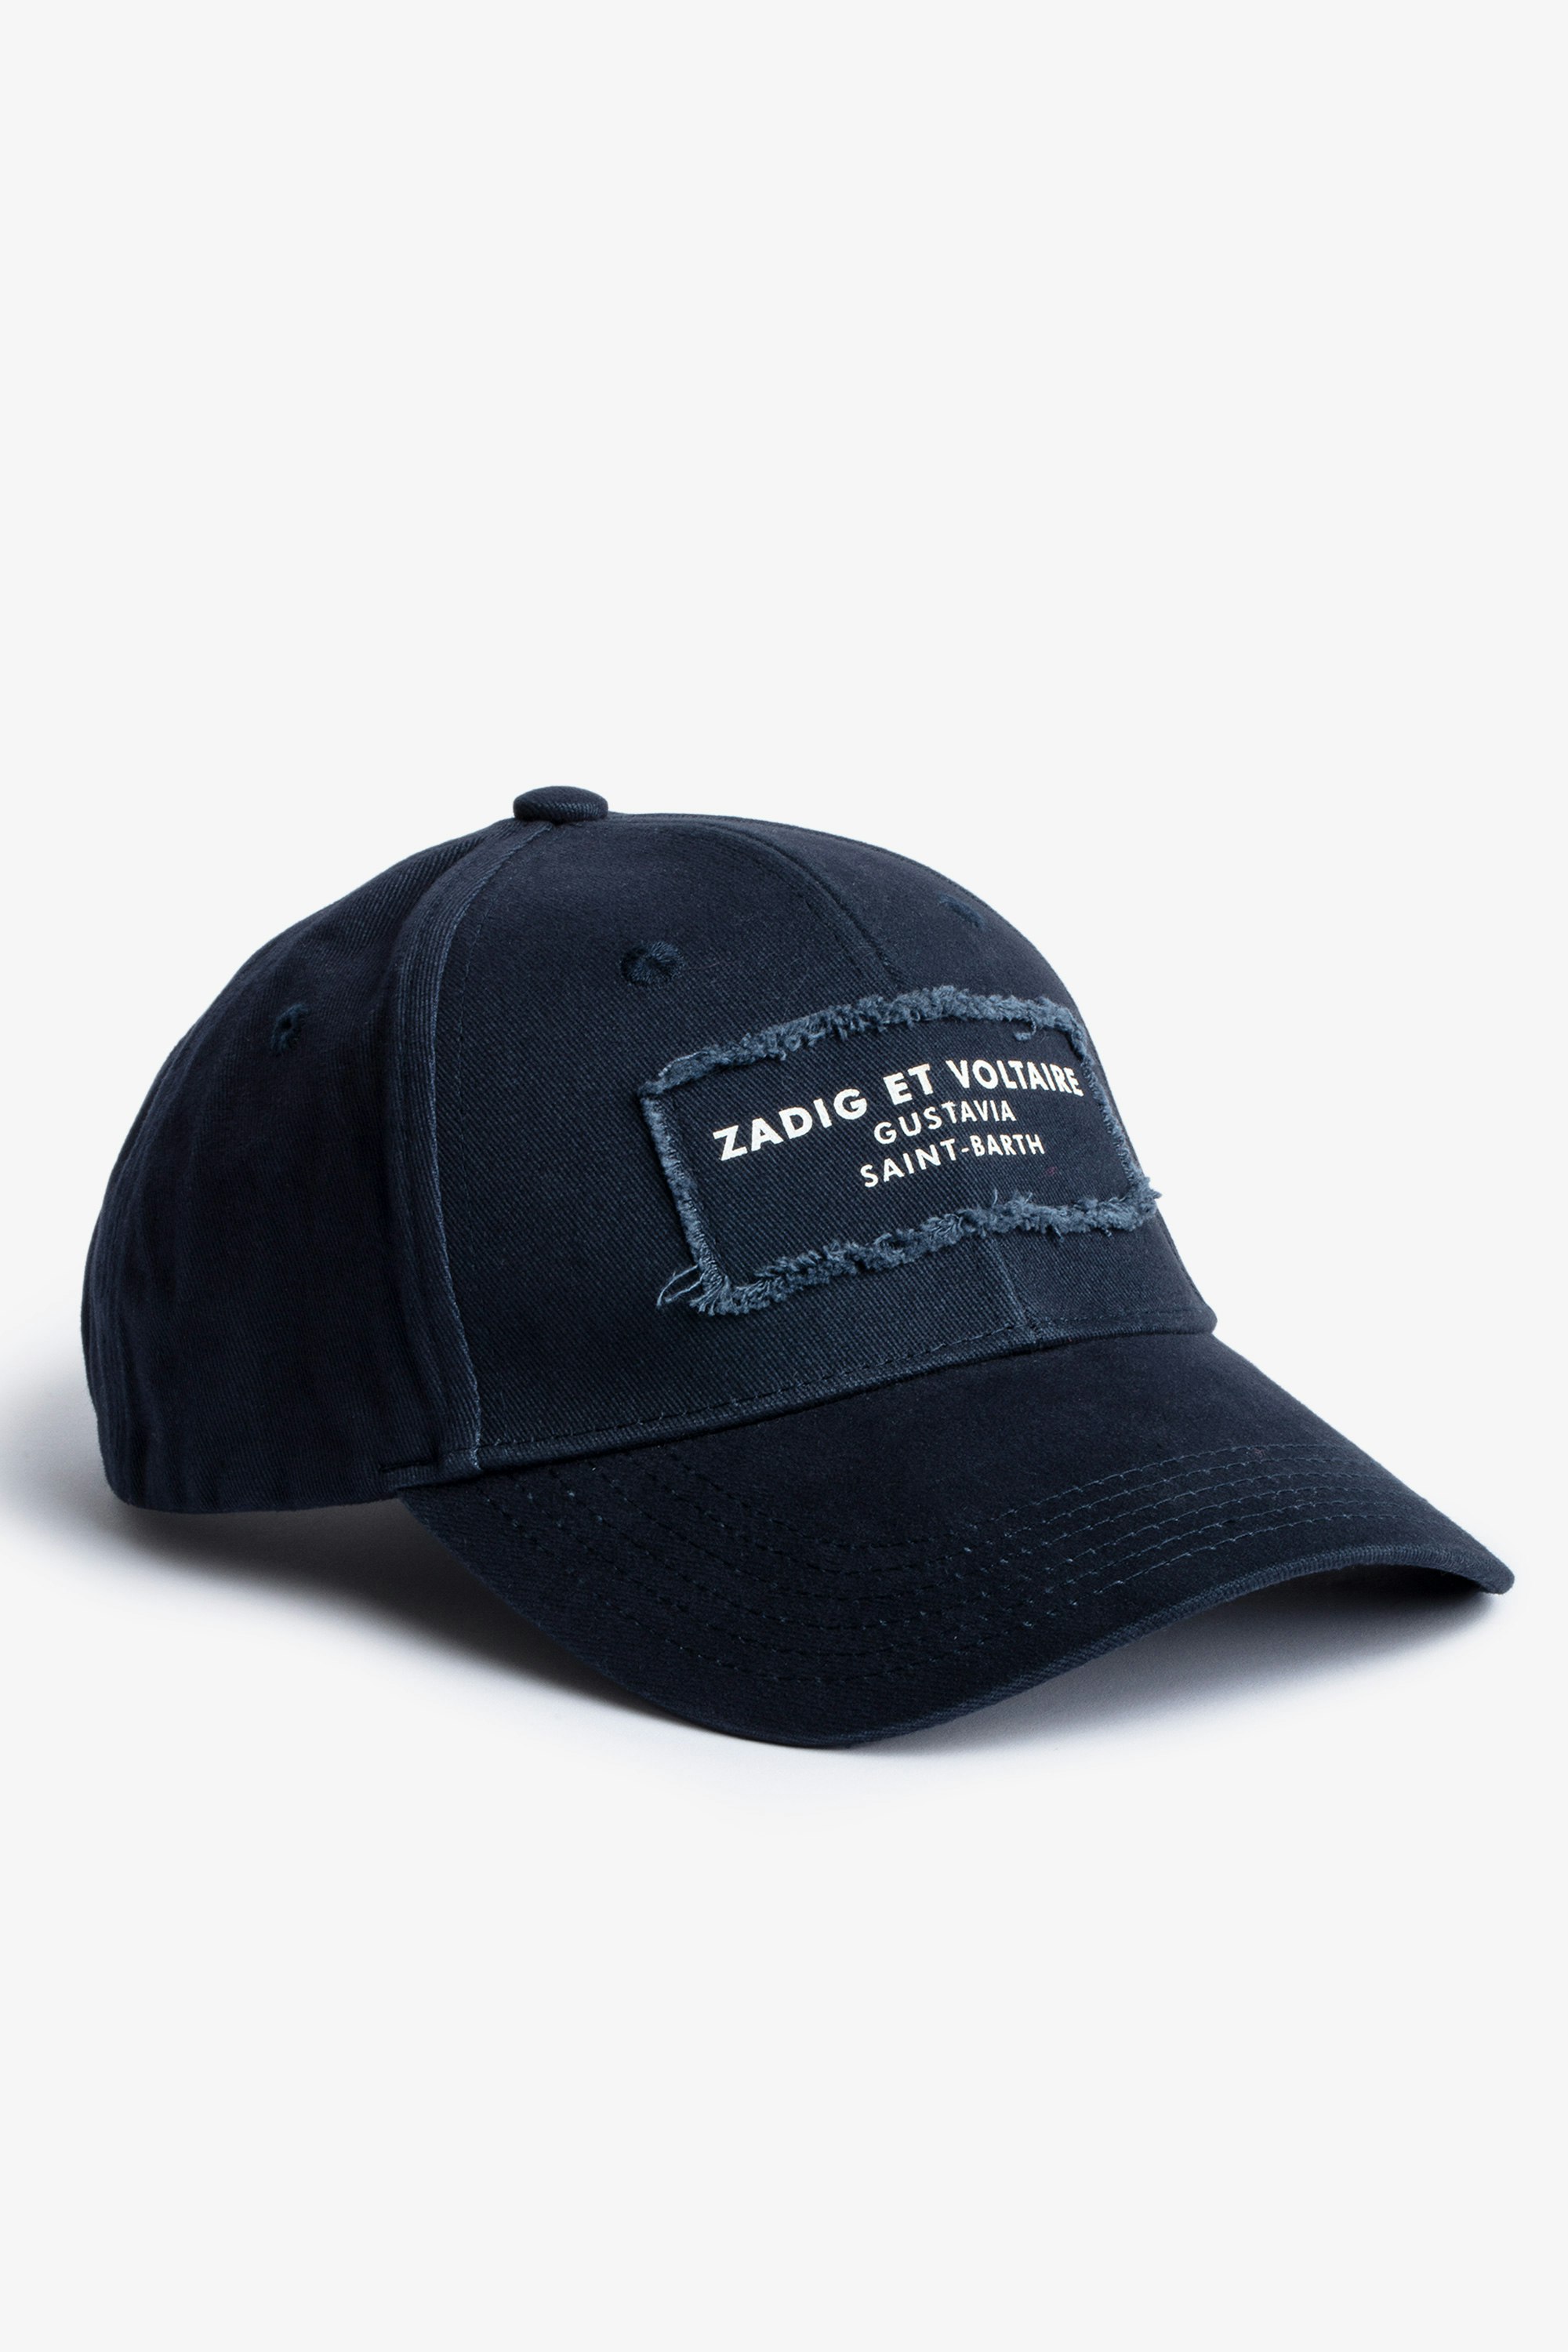 Klelia St Barts キャップ Navy blue cotton cap with St Barts embroidery 